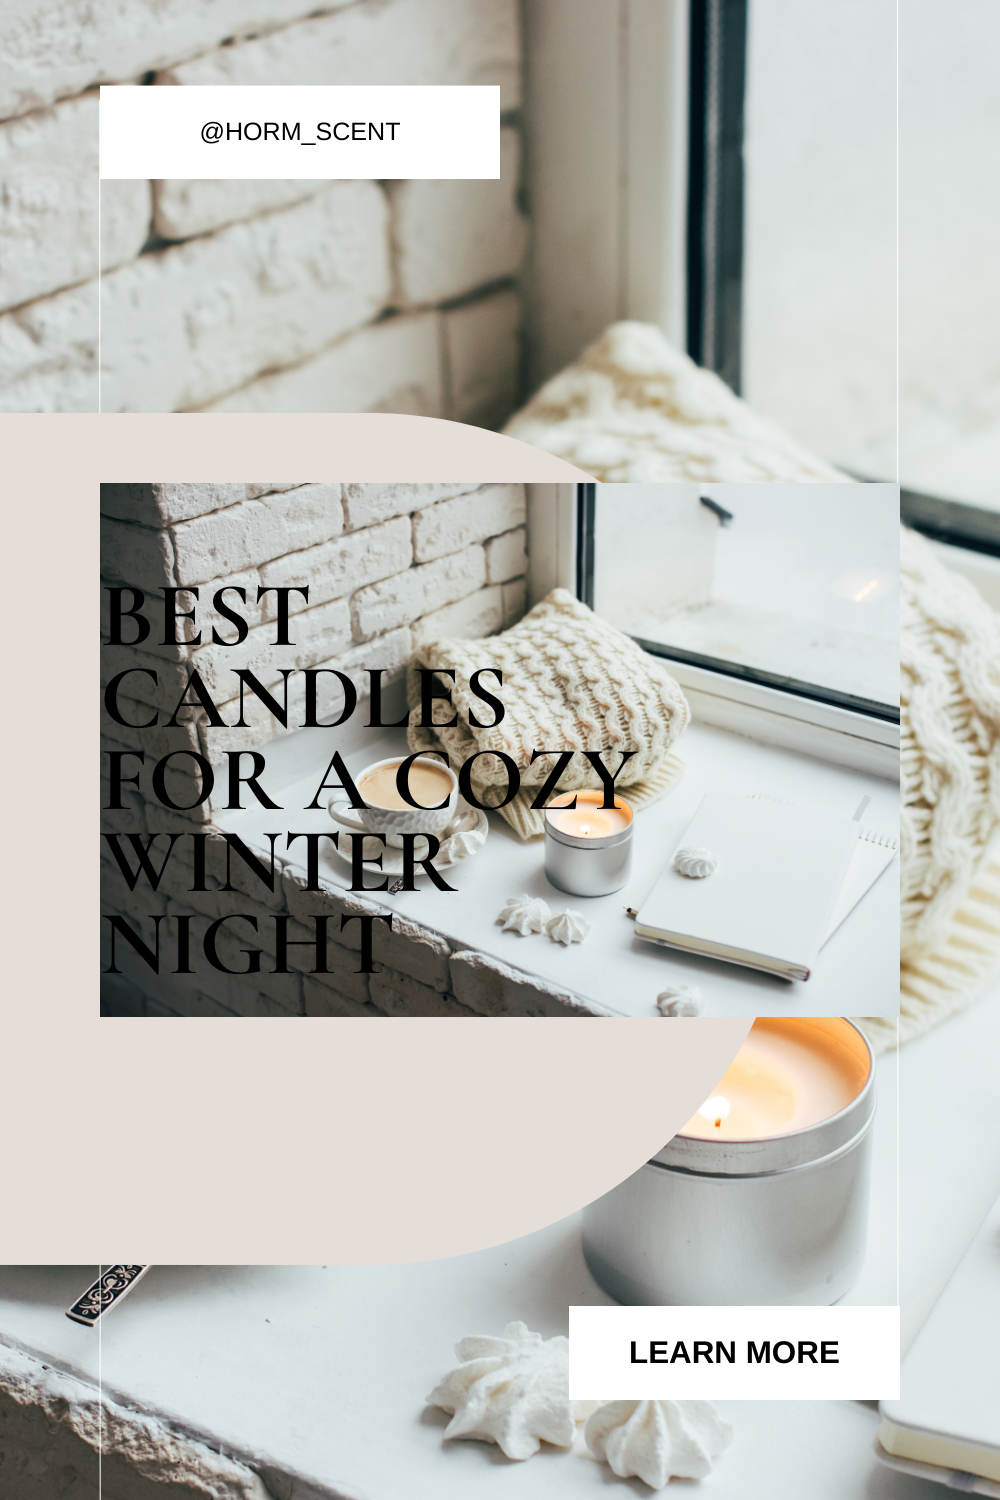 Best candles for a cozy winter night